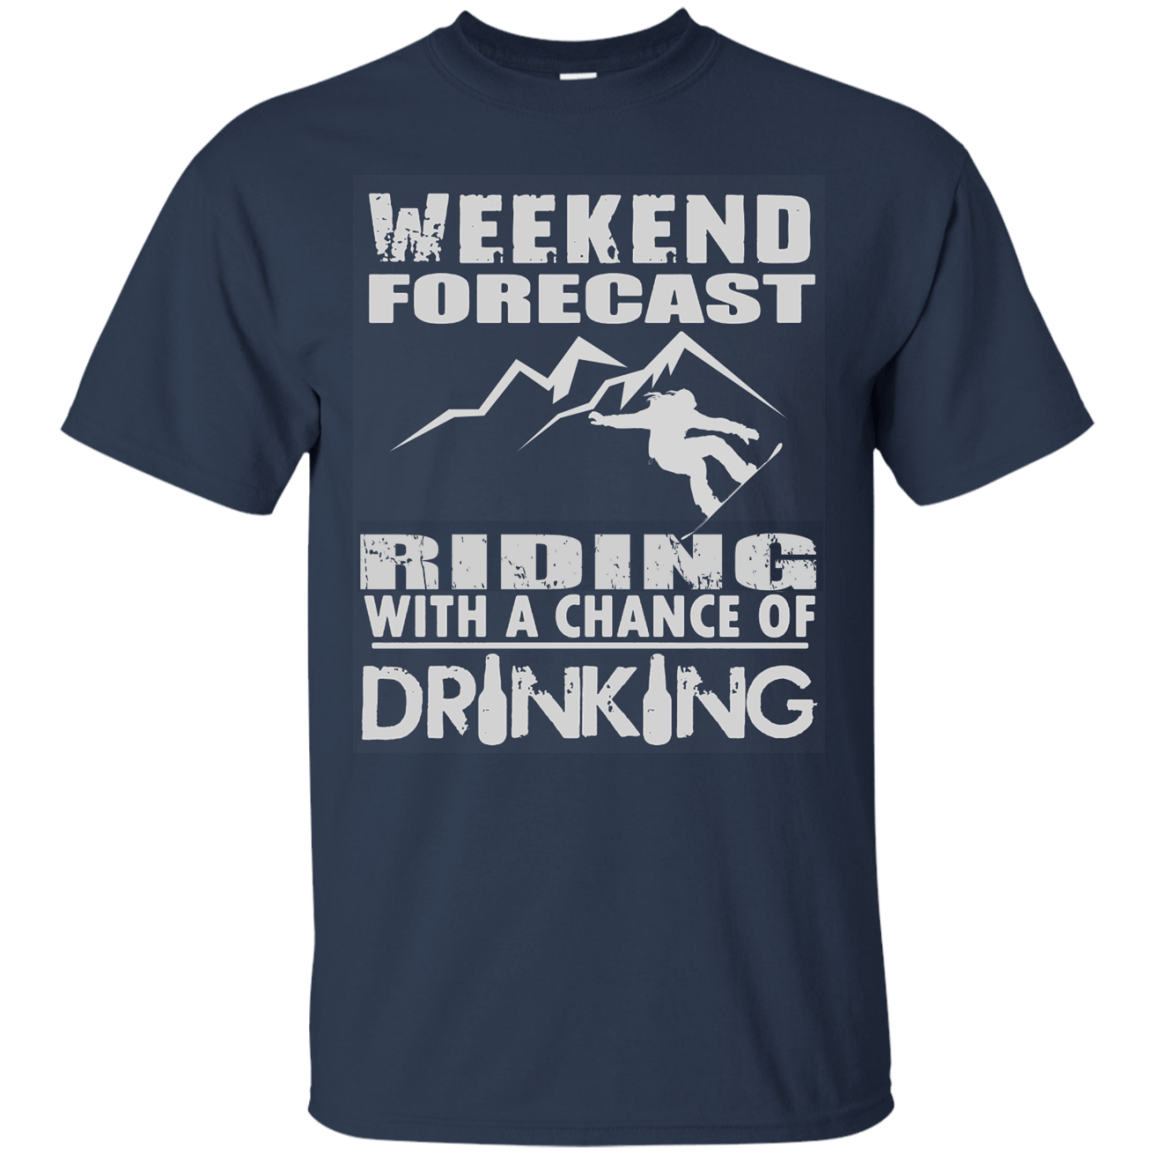 Weekened Forecast - Riding With A Chance Of Drinking Tees - Powderaddicts